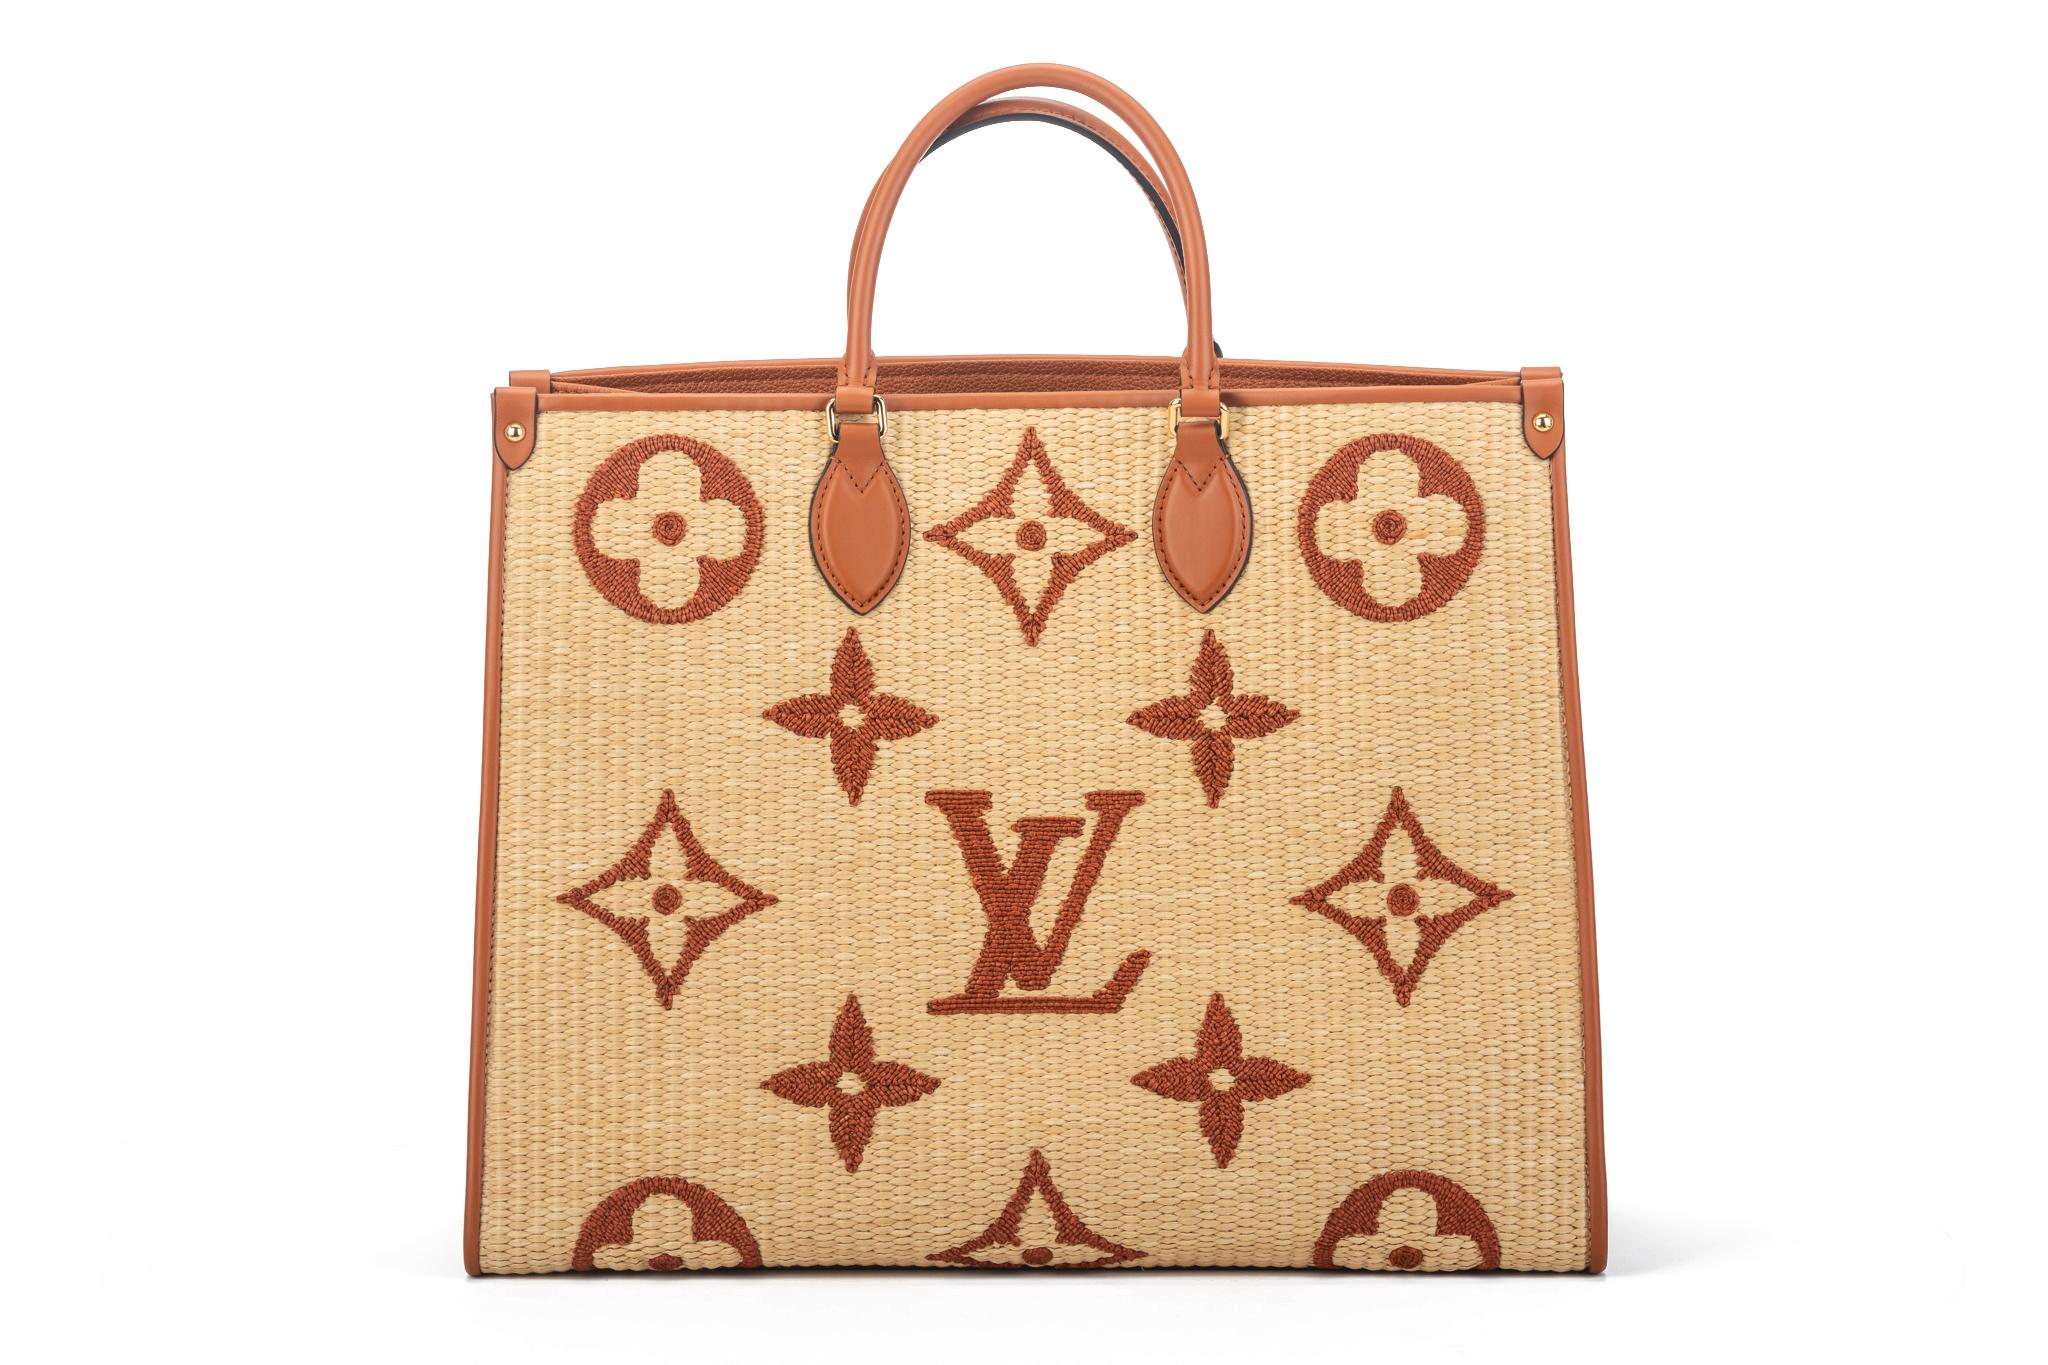 Louis Vuitton 2021 limited edition raffia collection. Brand new in box with original dust cover. Large on the go in natural and caramel raffia monogram canvas and cowhide trim. Yellow raffia and leather charm. Double straps, hands and shoulder. Made